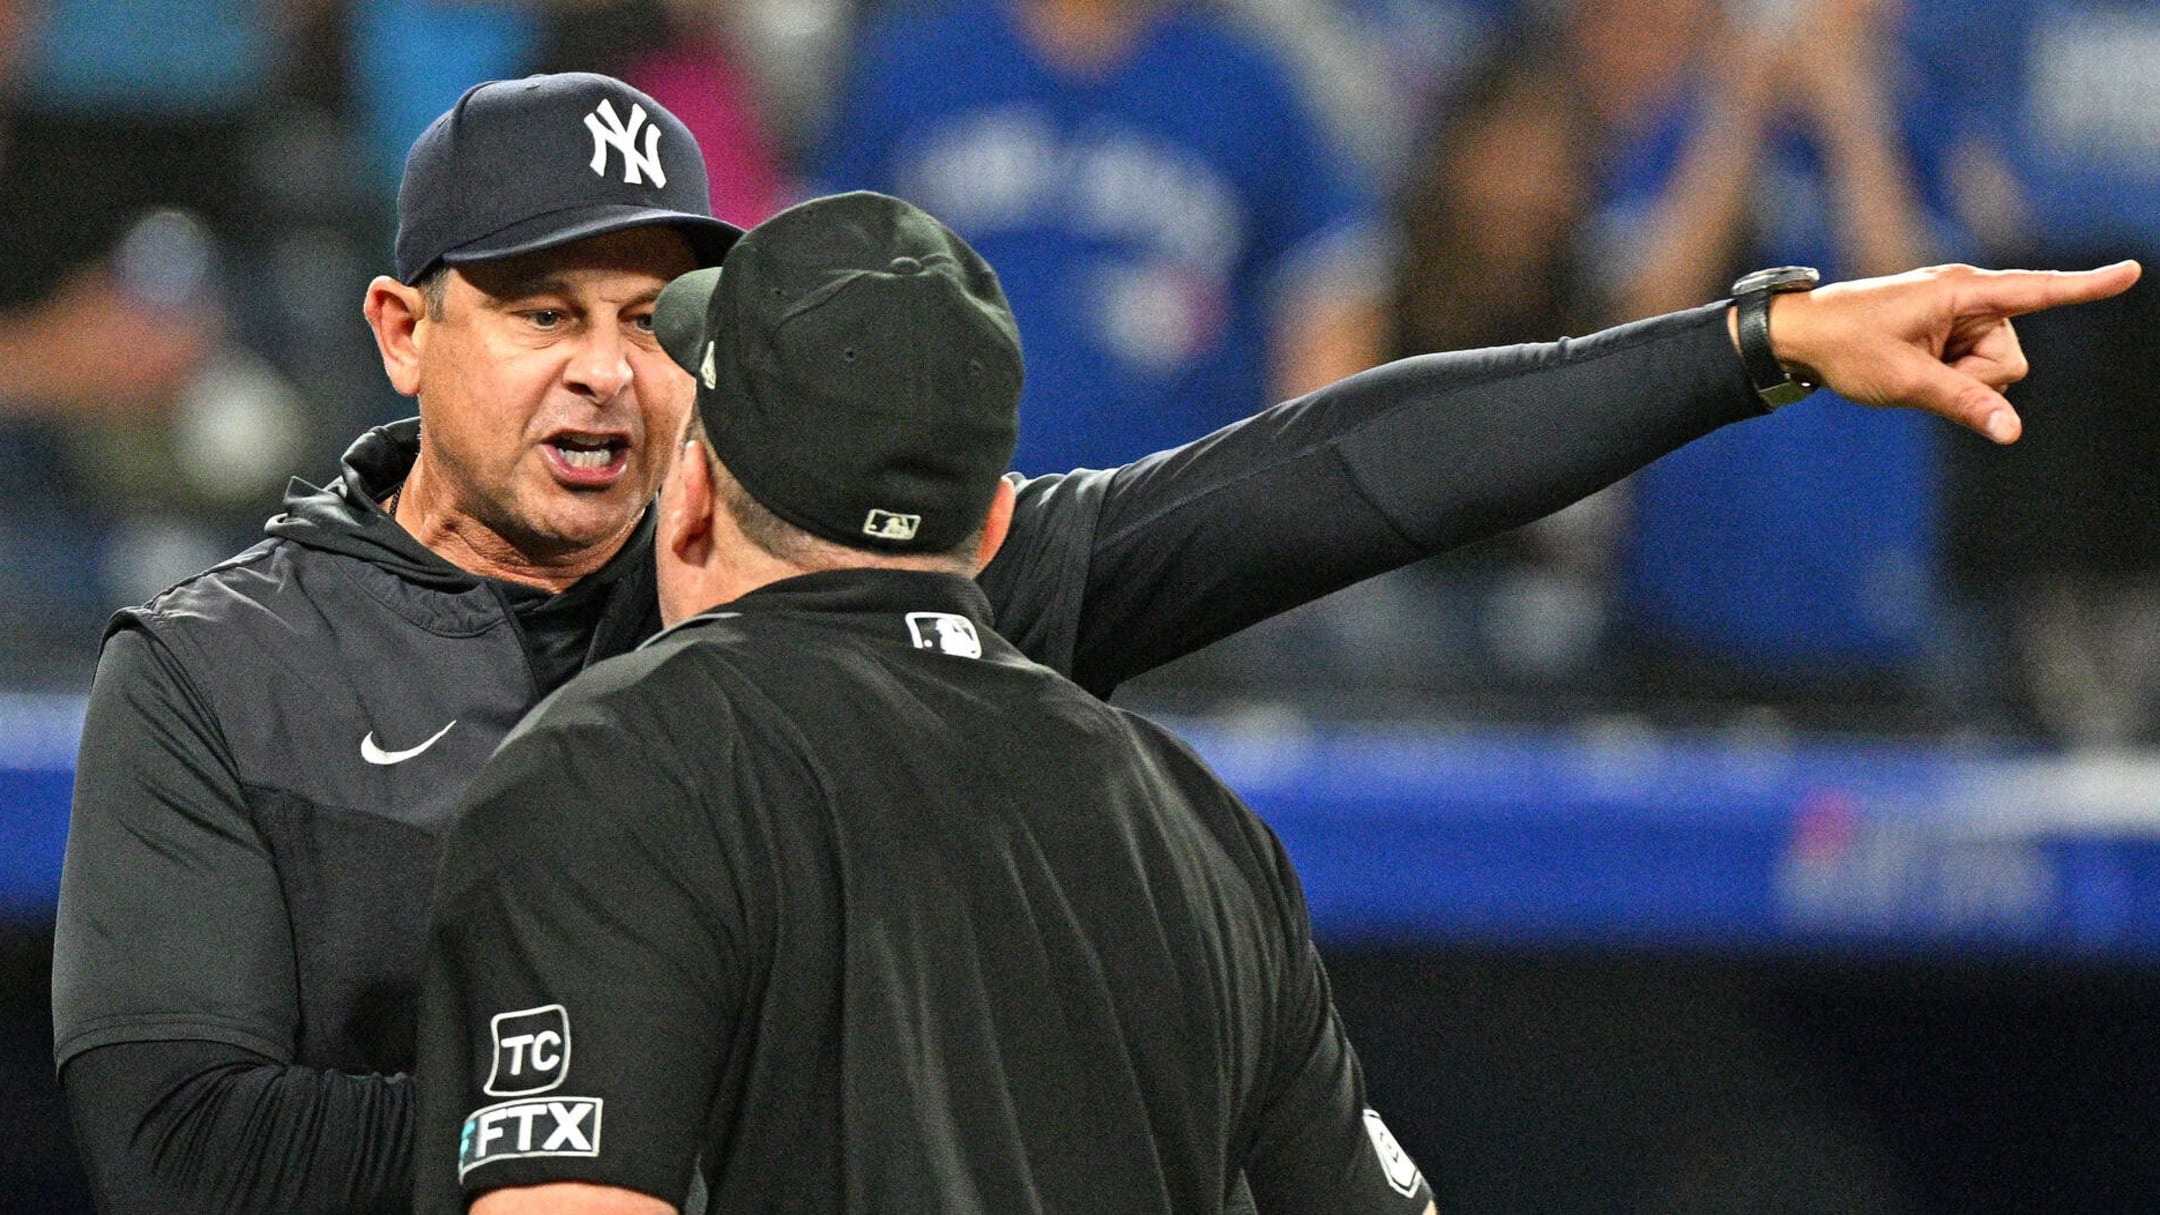 Watch: Aaron Boone went off on umpire Marty Foster after ejection